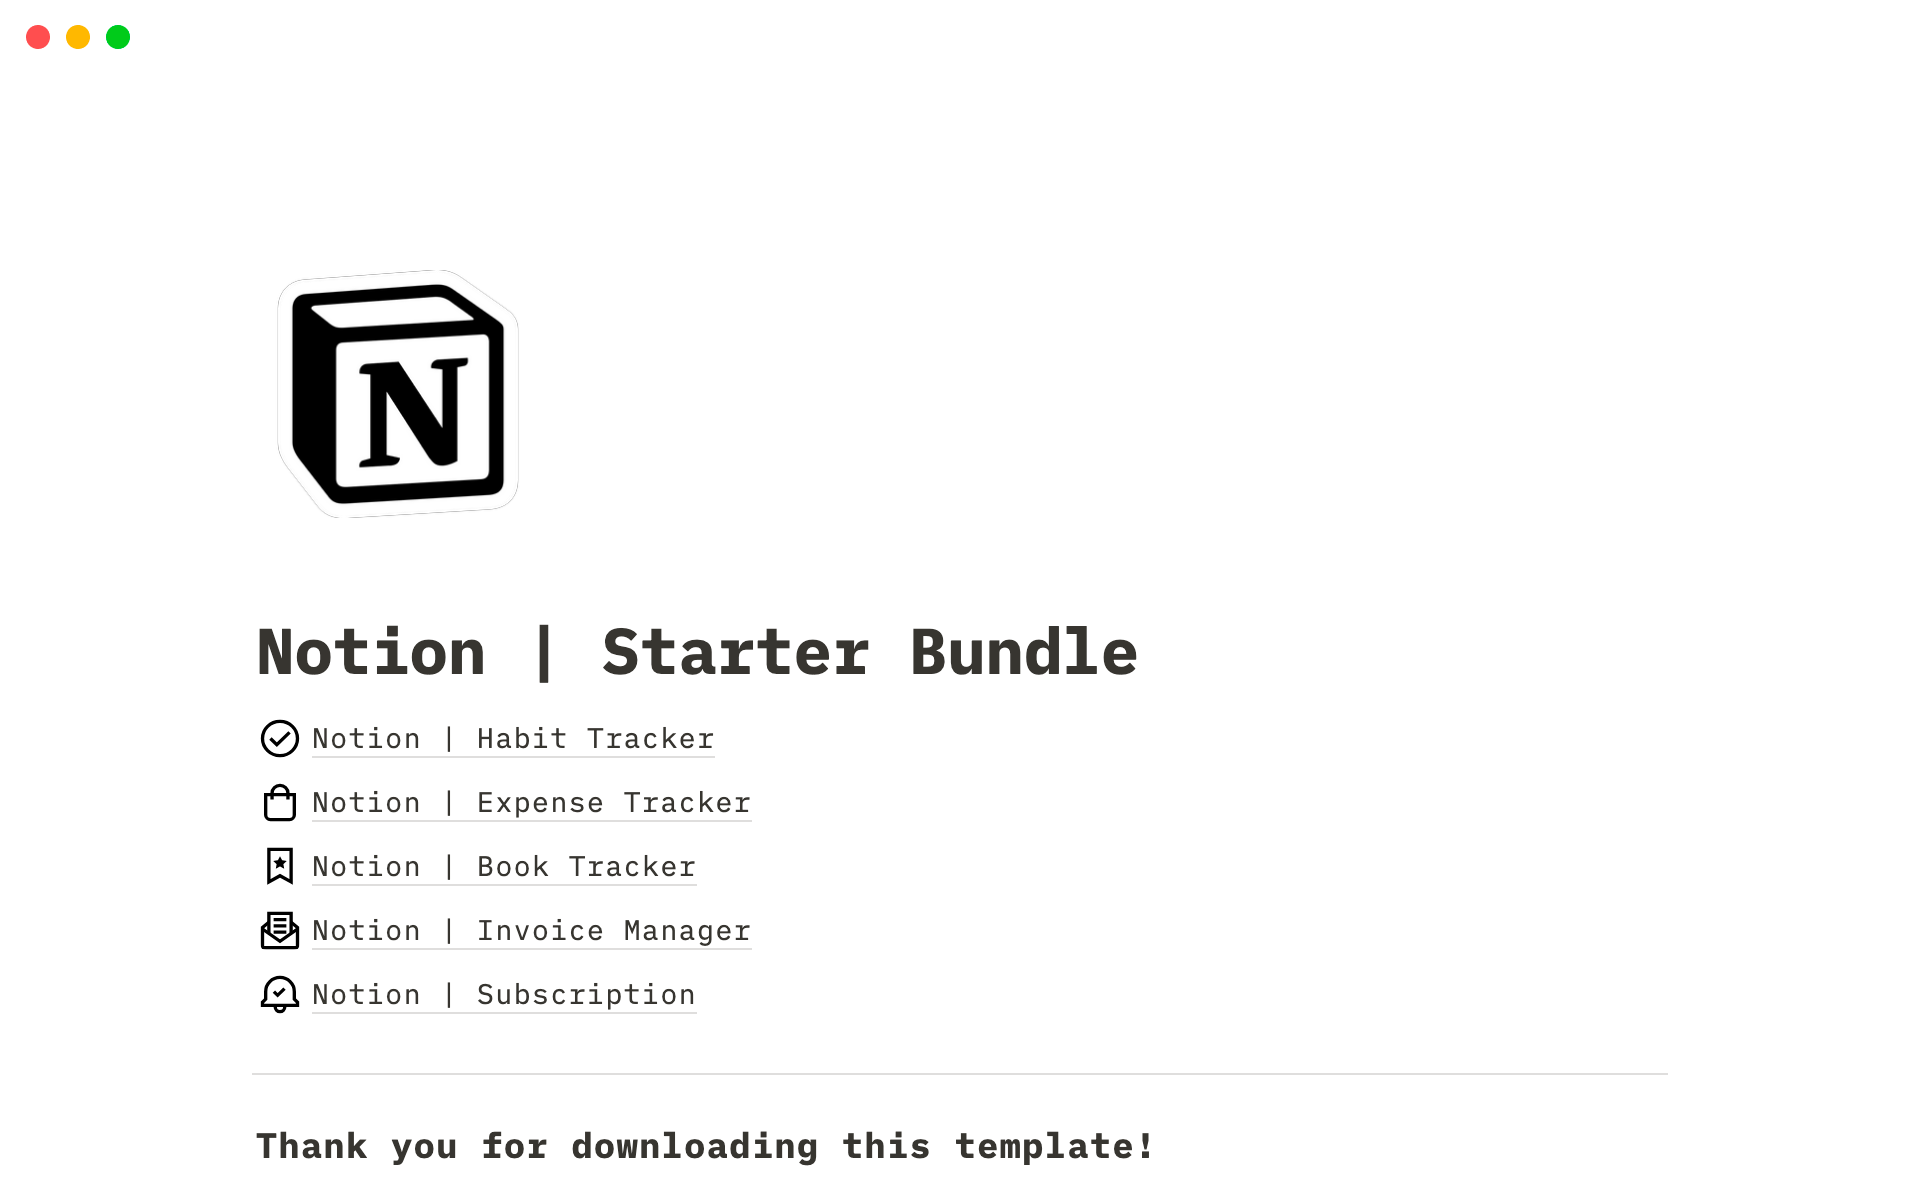 Free Notion Templates: Improve Your Productivity with Ready-to-Use Templates